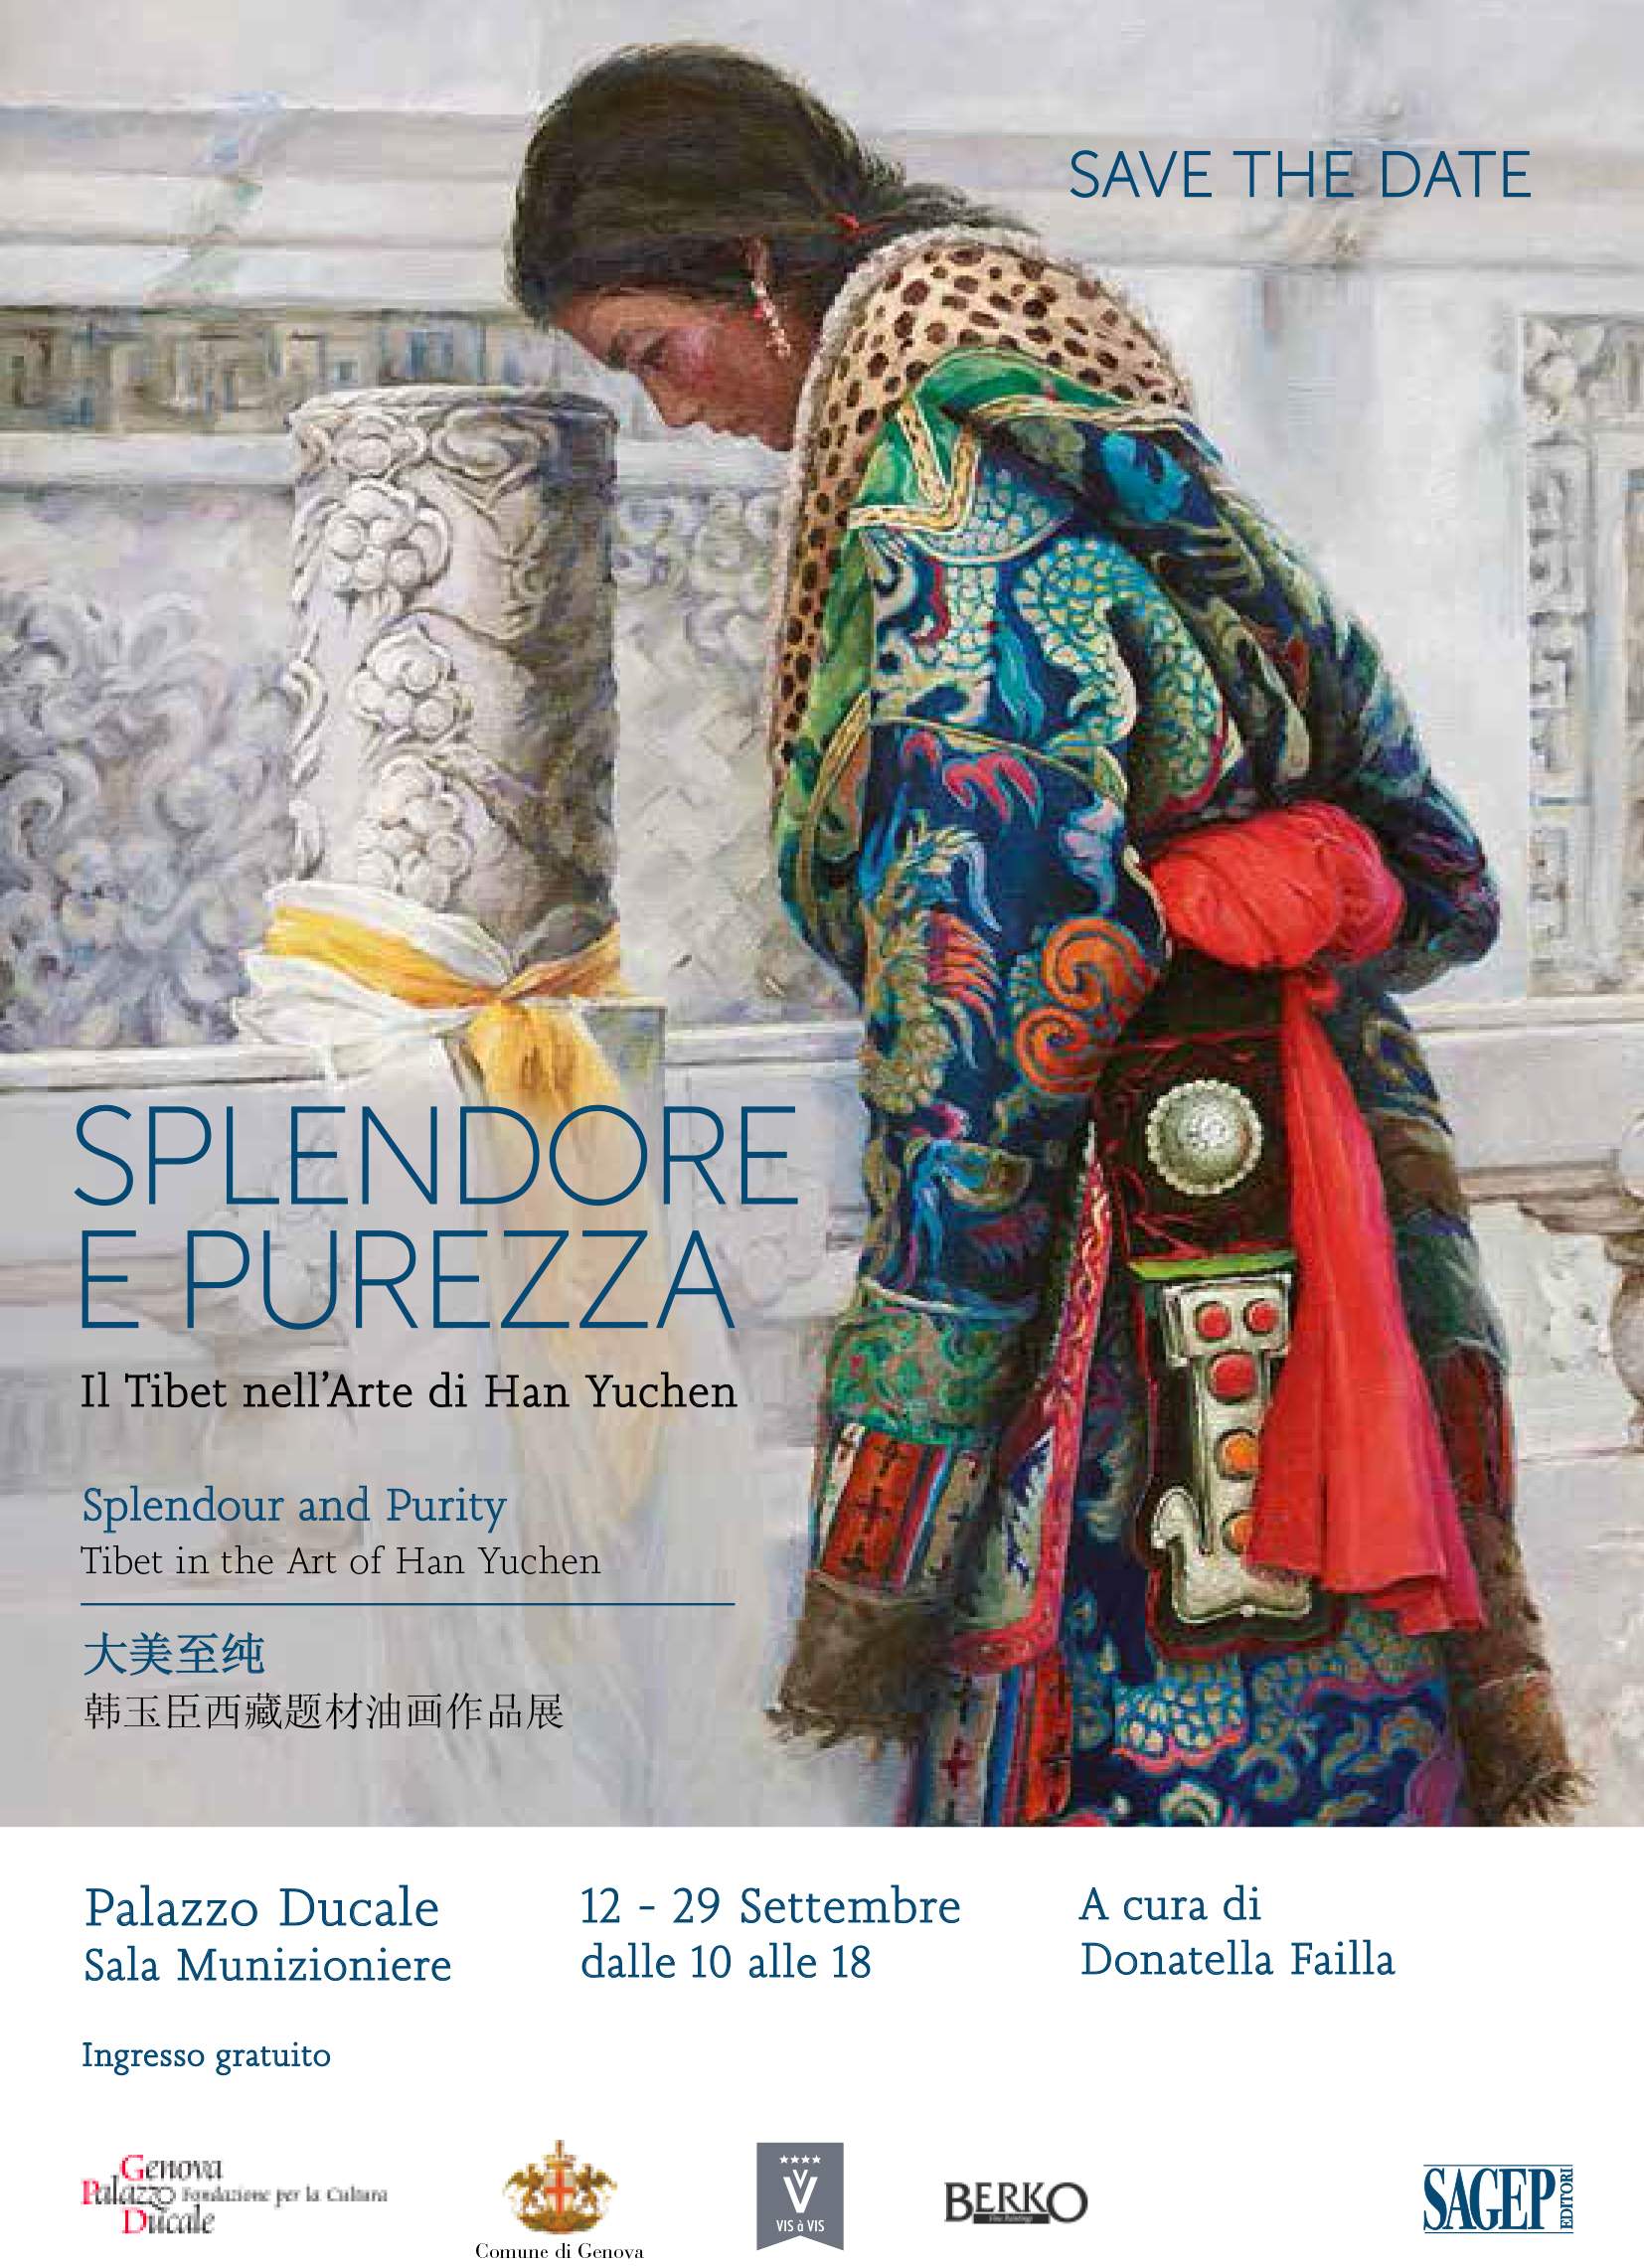 Tibet in the art of Han Yuchen on display in Genoa at Palazzo Ducale